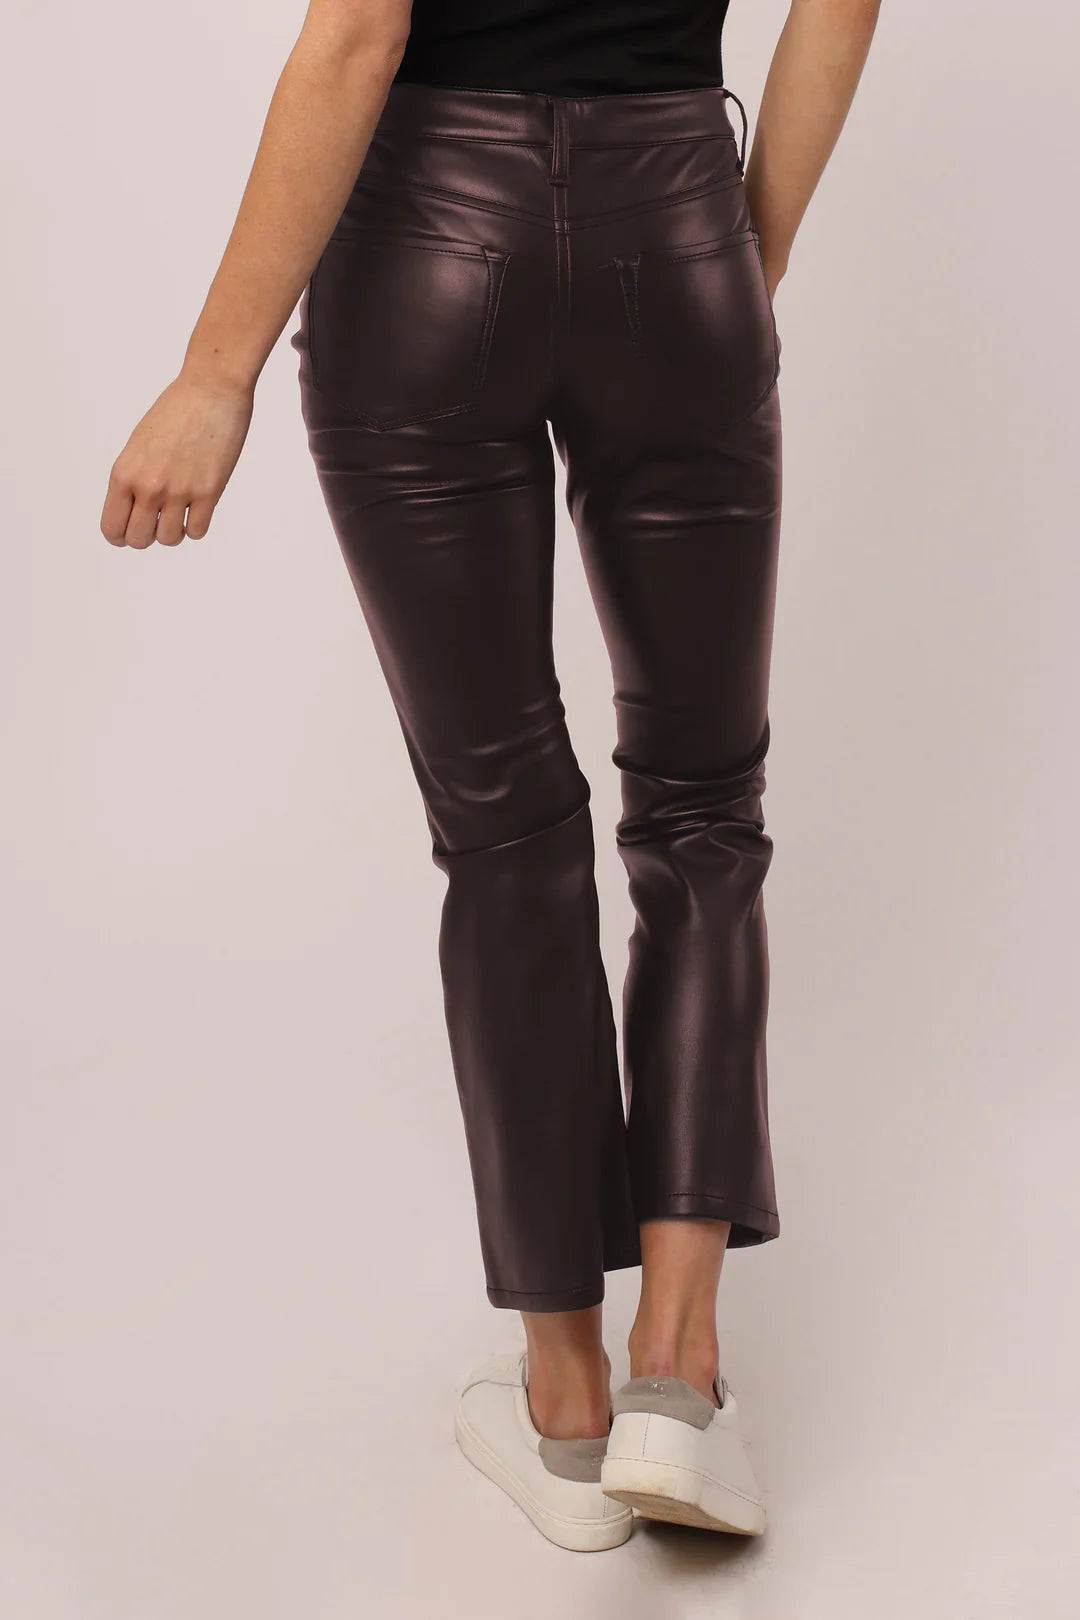 Jeanette Vegan Leather Cropped Pant - Coffee